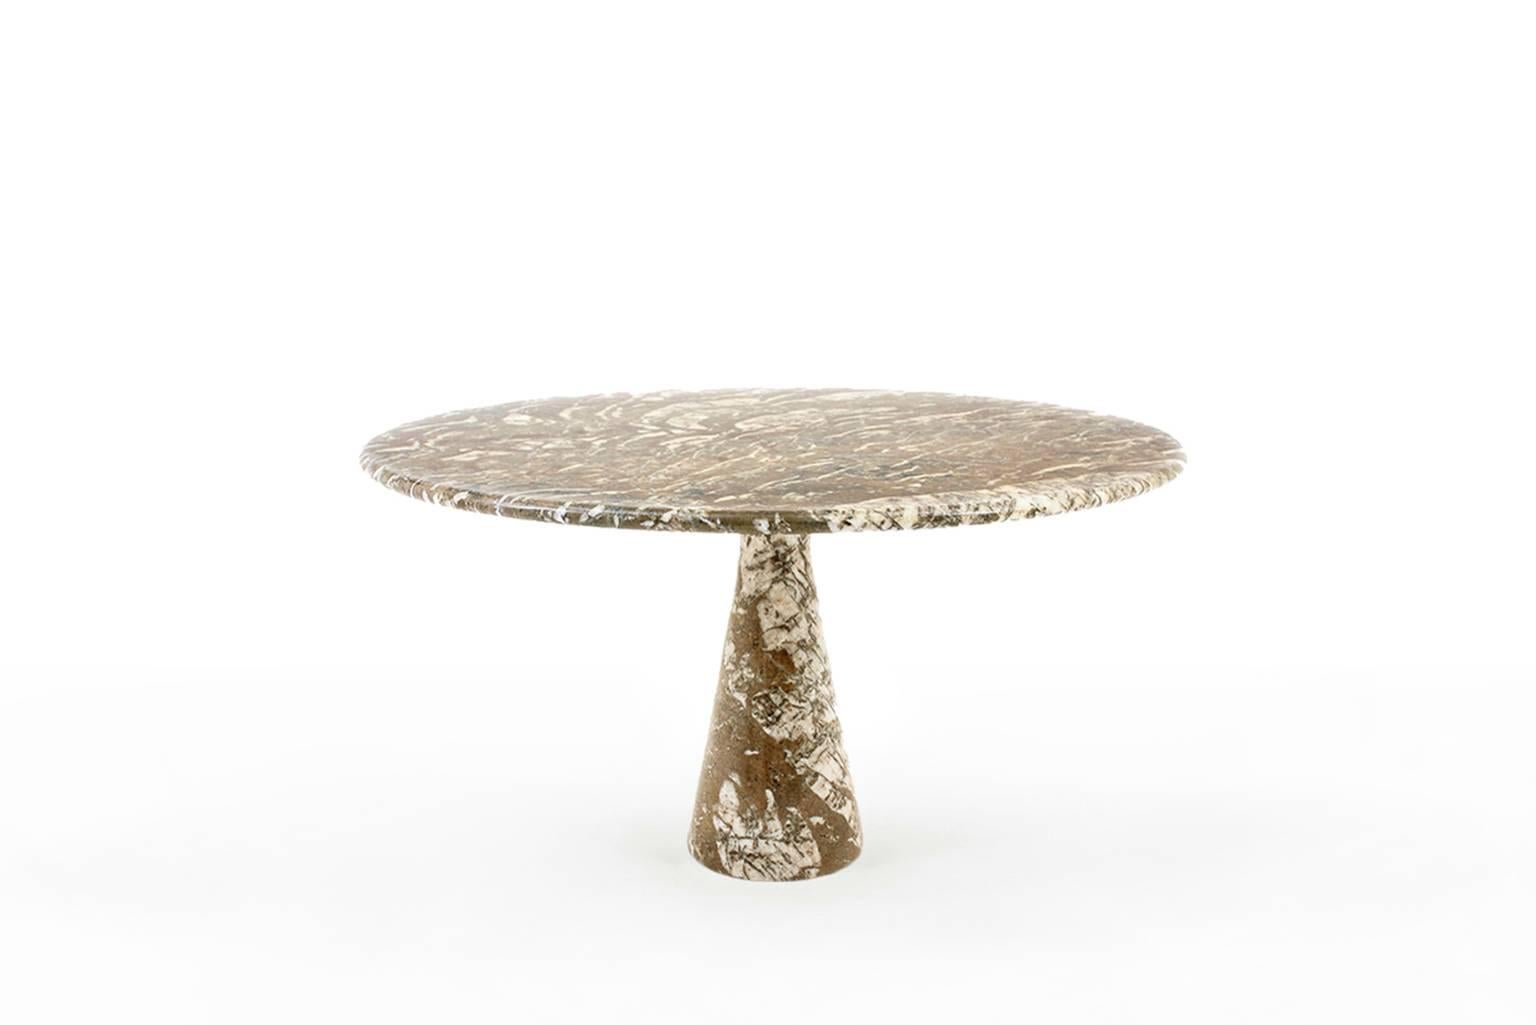 Beautiful pedestal dining table model ‘M1’ by Angelo Mangiarotti for Skipper, Italy 1969. Exceptional light brown marble version with a stunning pattern (resembles the stripes of a tiger). The 3 cm thick marble top lays on a solid mable cone shaped